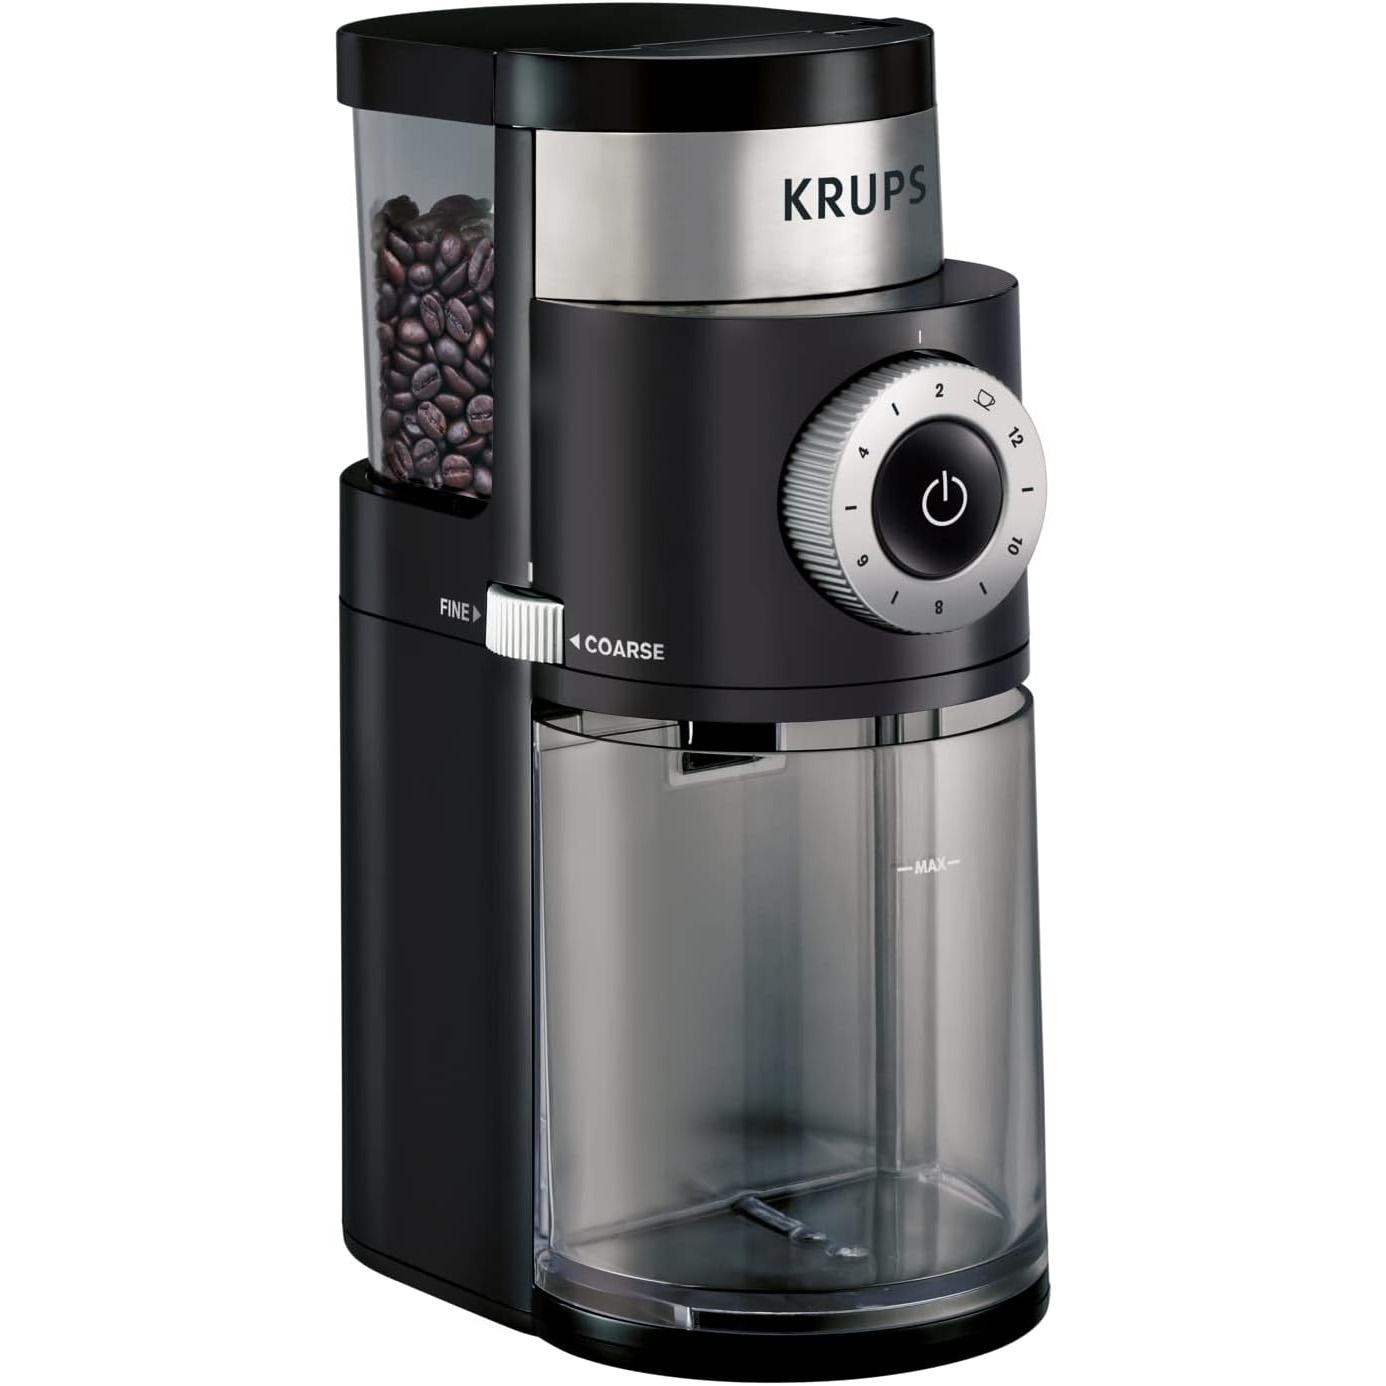 Krups 8-Oz Precise Stainless Steel Flat Burr Coffee Bean Grinder for $31.56